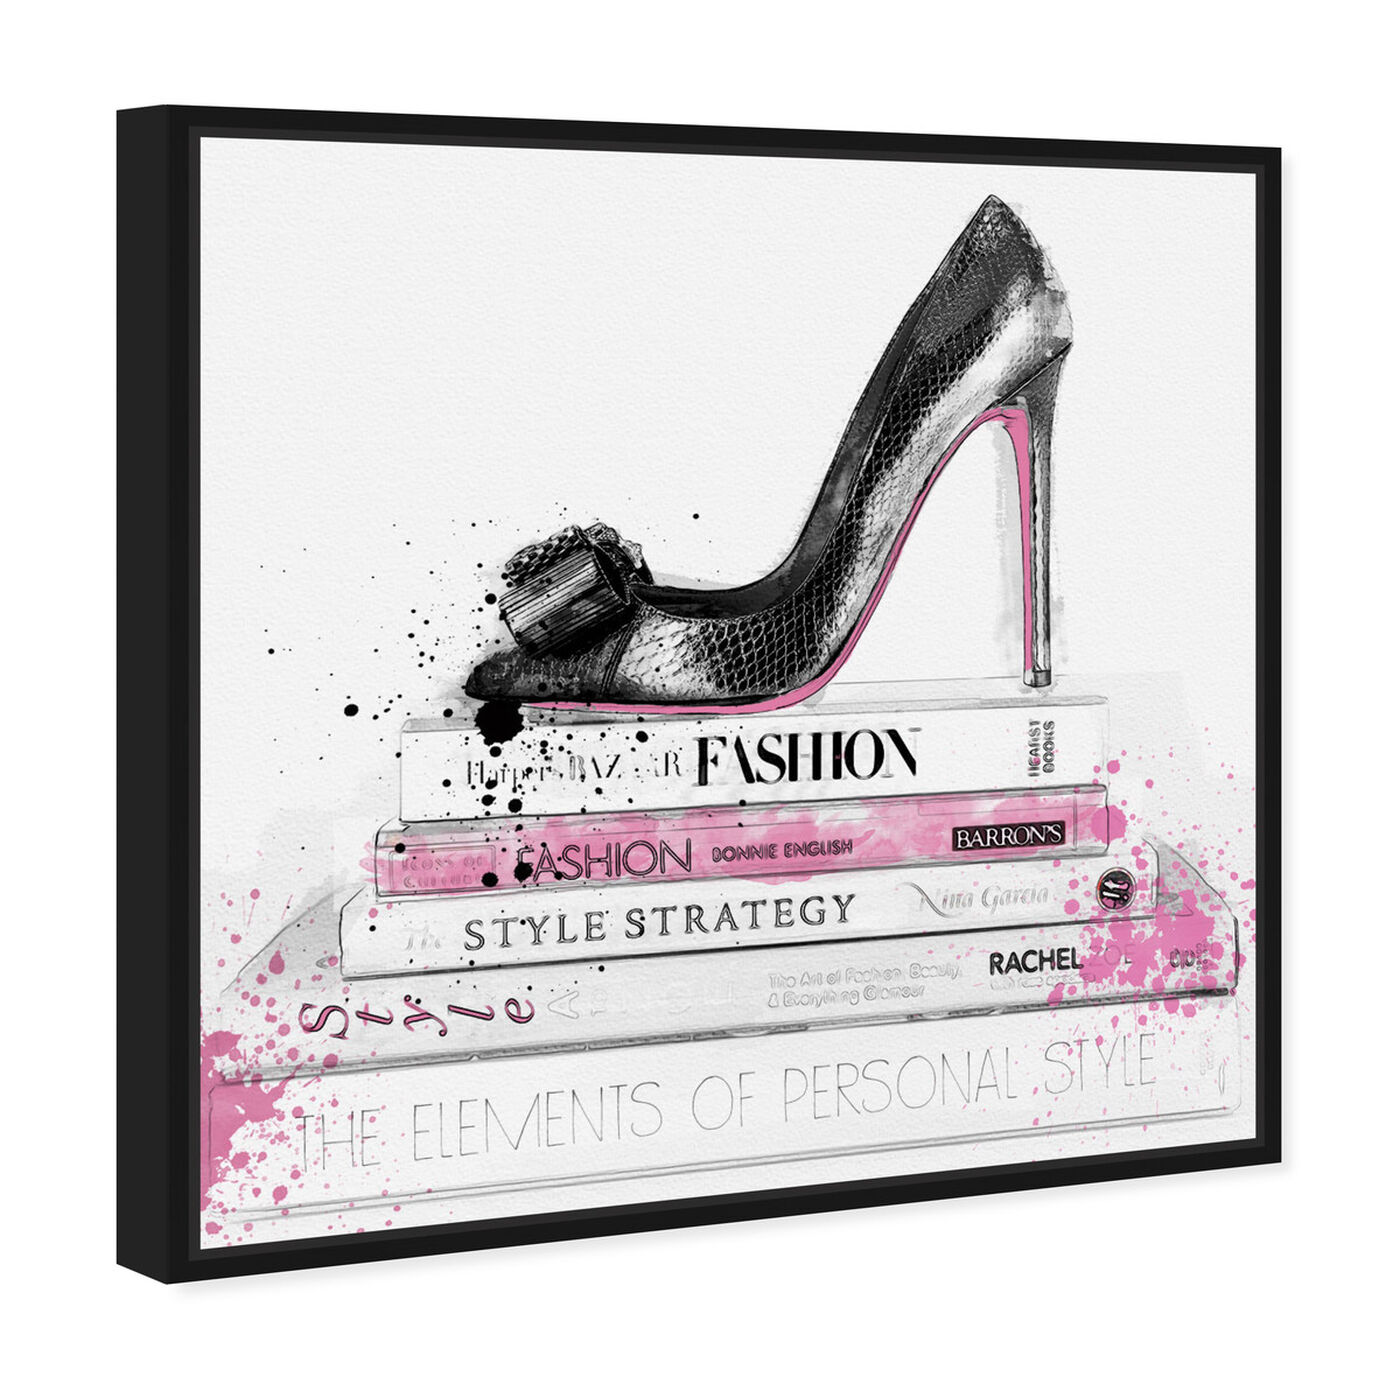 Angled view of Black Shoe and Pink Lady Books featuring fashion and glam and shoes art.